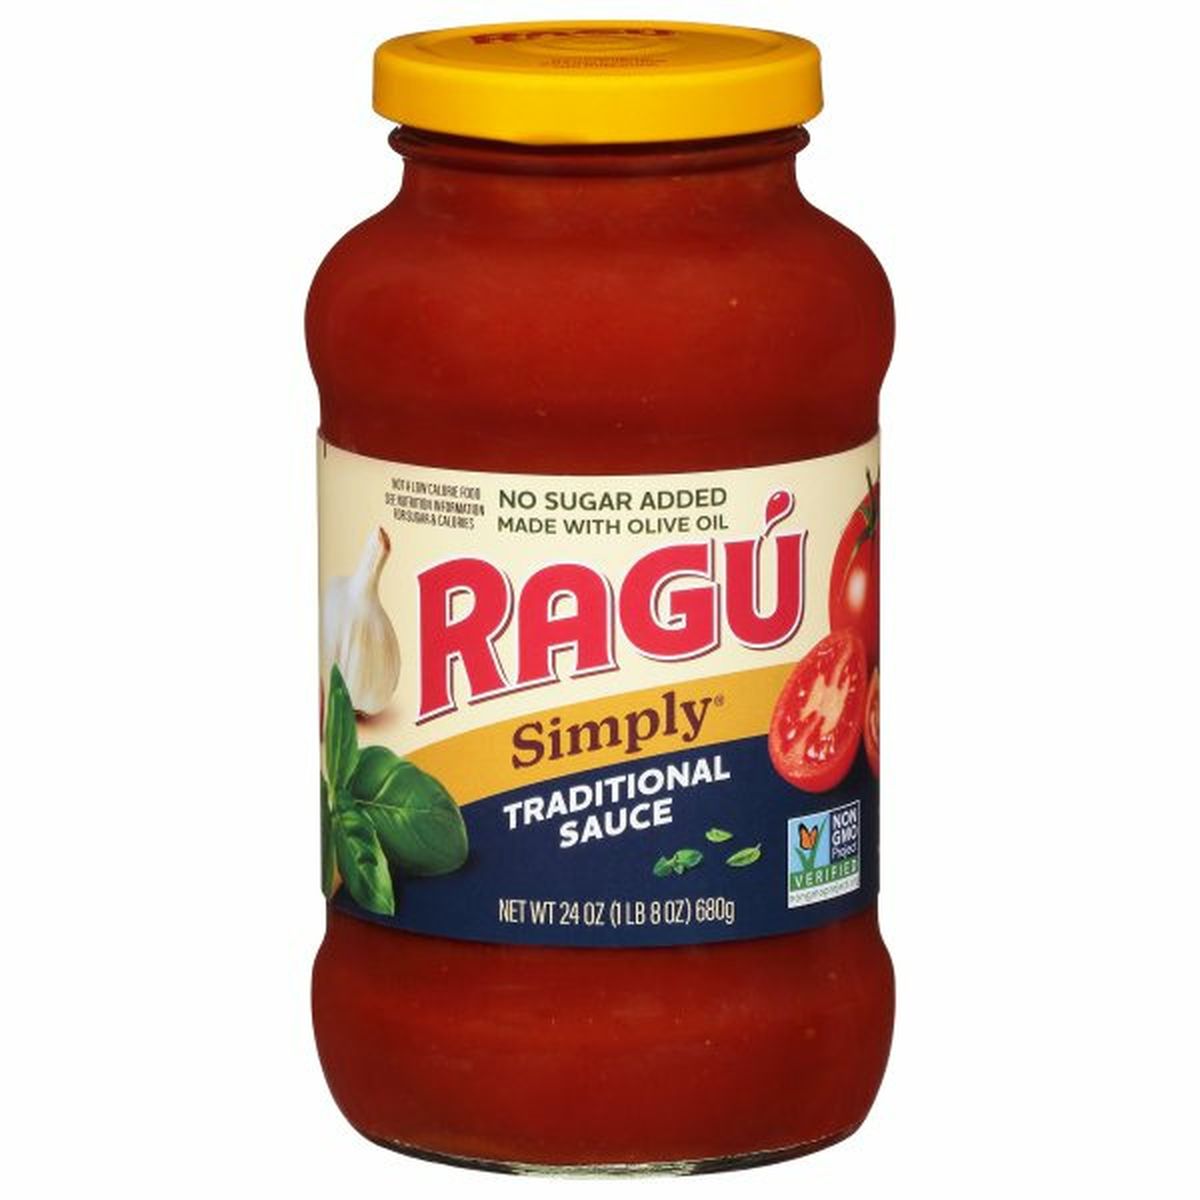 Calories in Ragu Simply Traditional Sauce